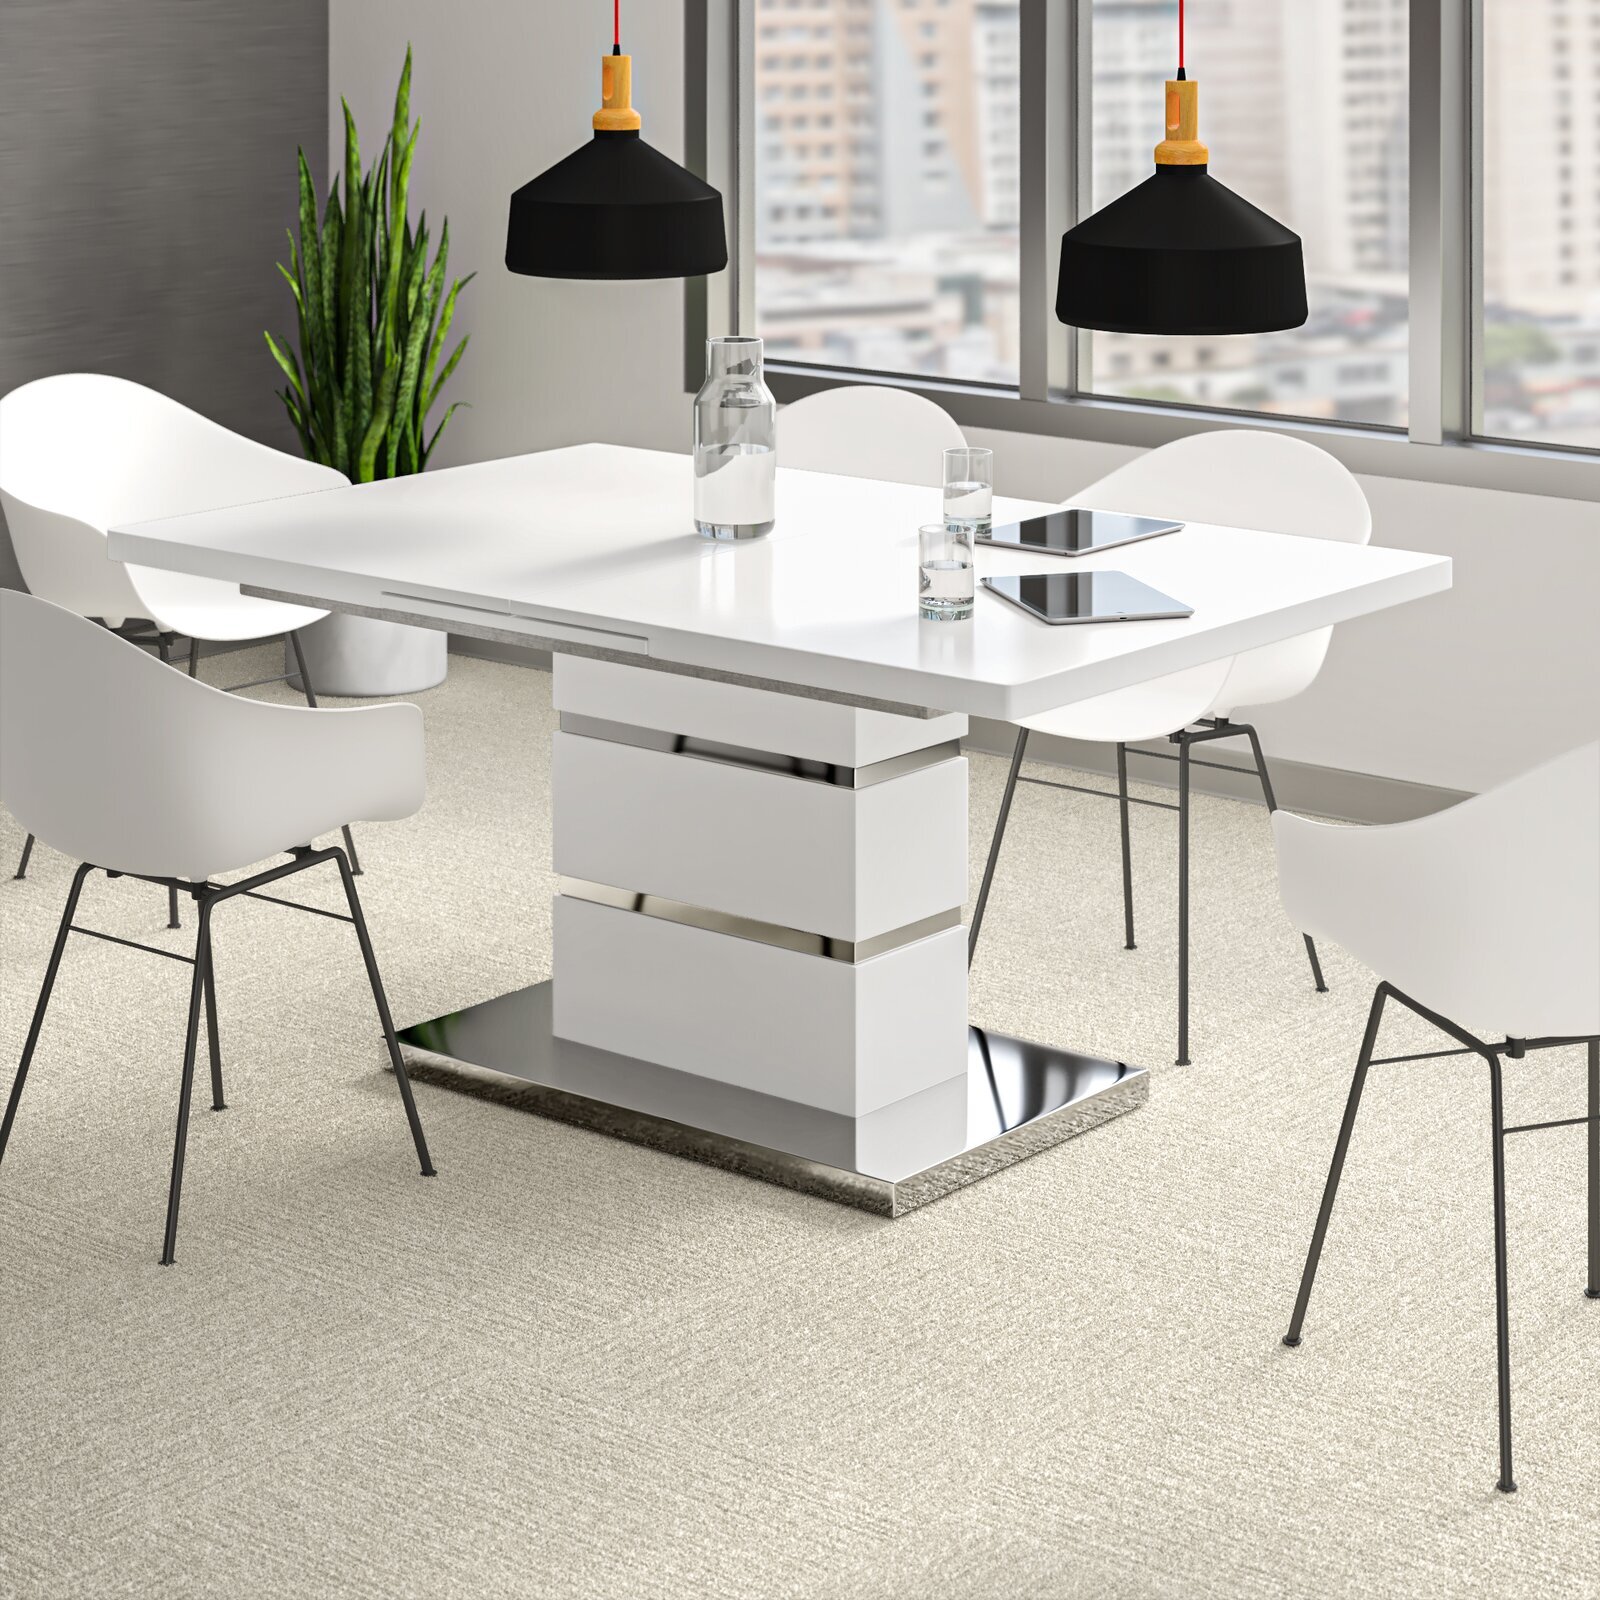 A modern extendable dining table